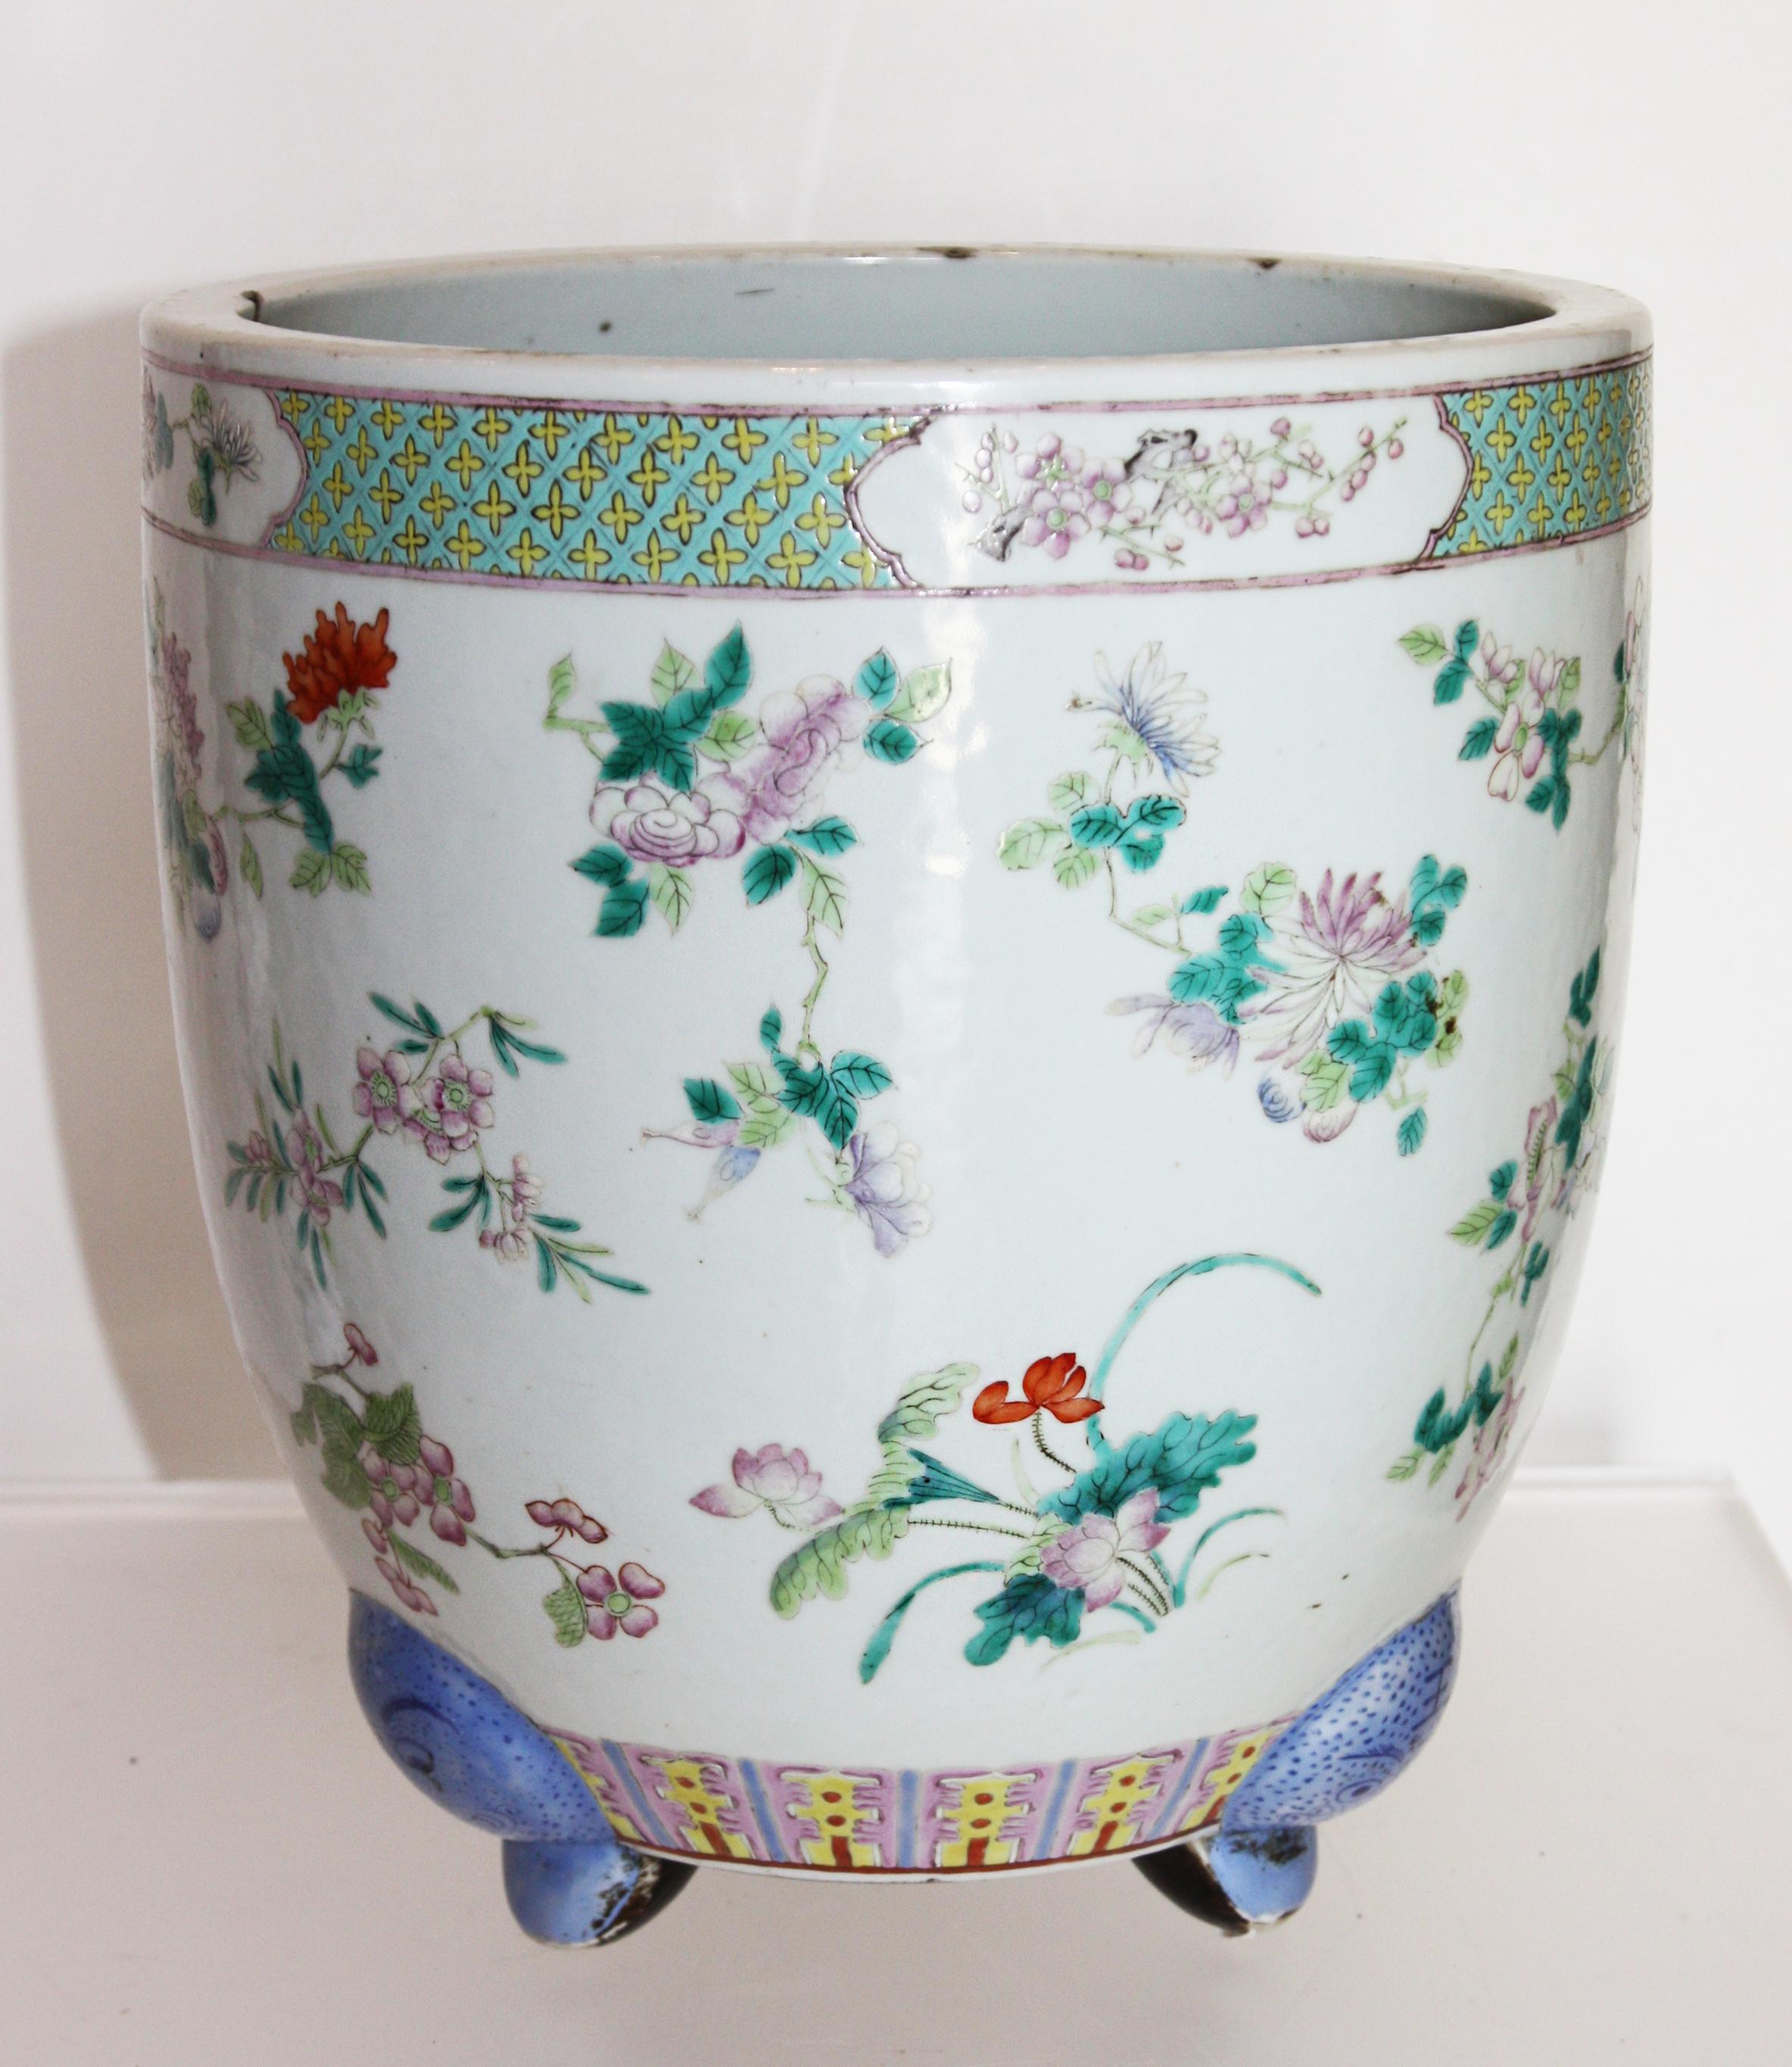 Pair of beautiful hand-painted Chinese porcelain jardinieres with floral pattern and design band around the top. 

Dimensions are for one pot.